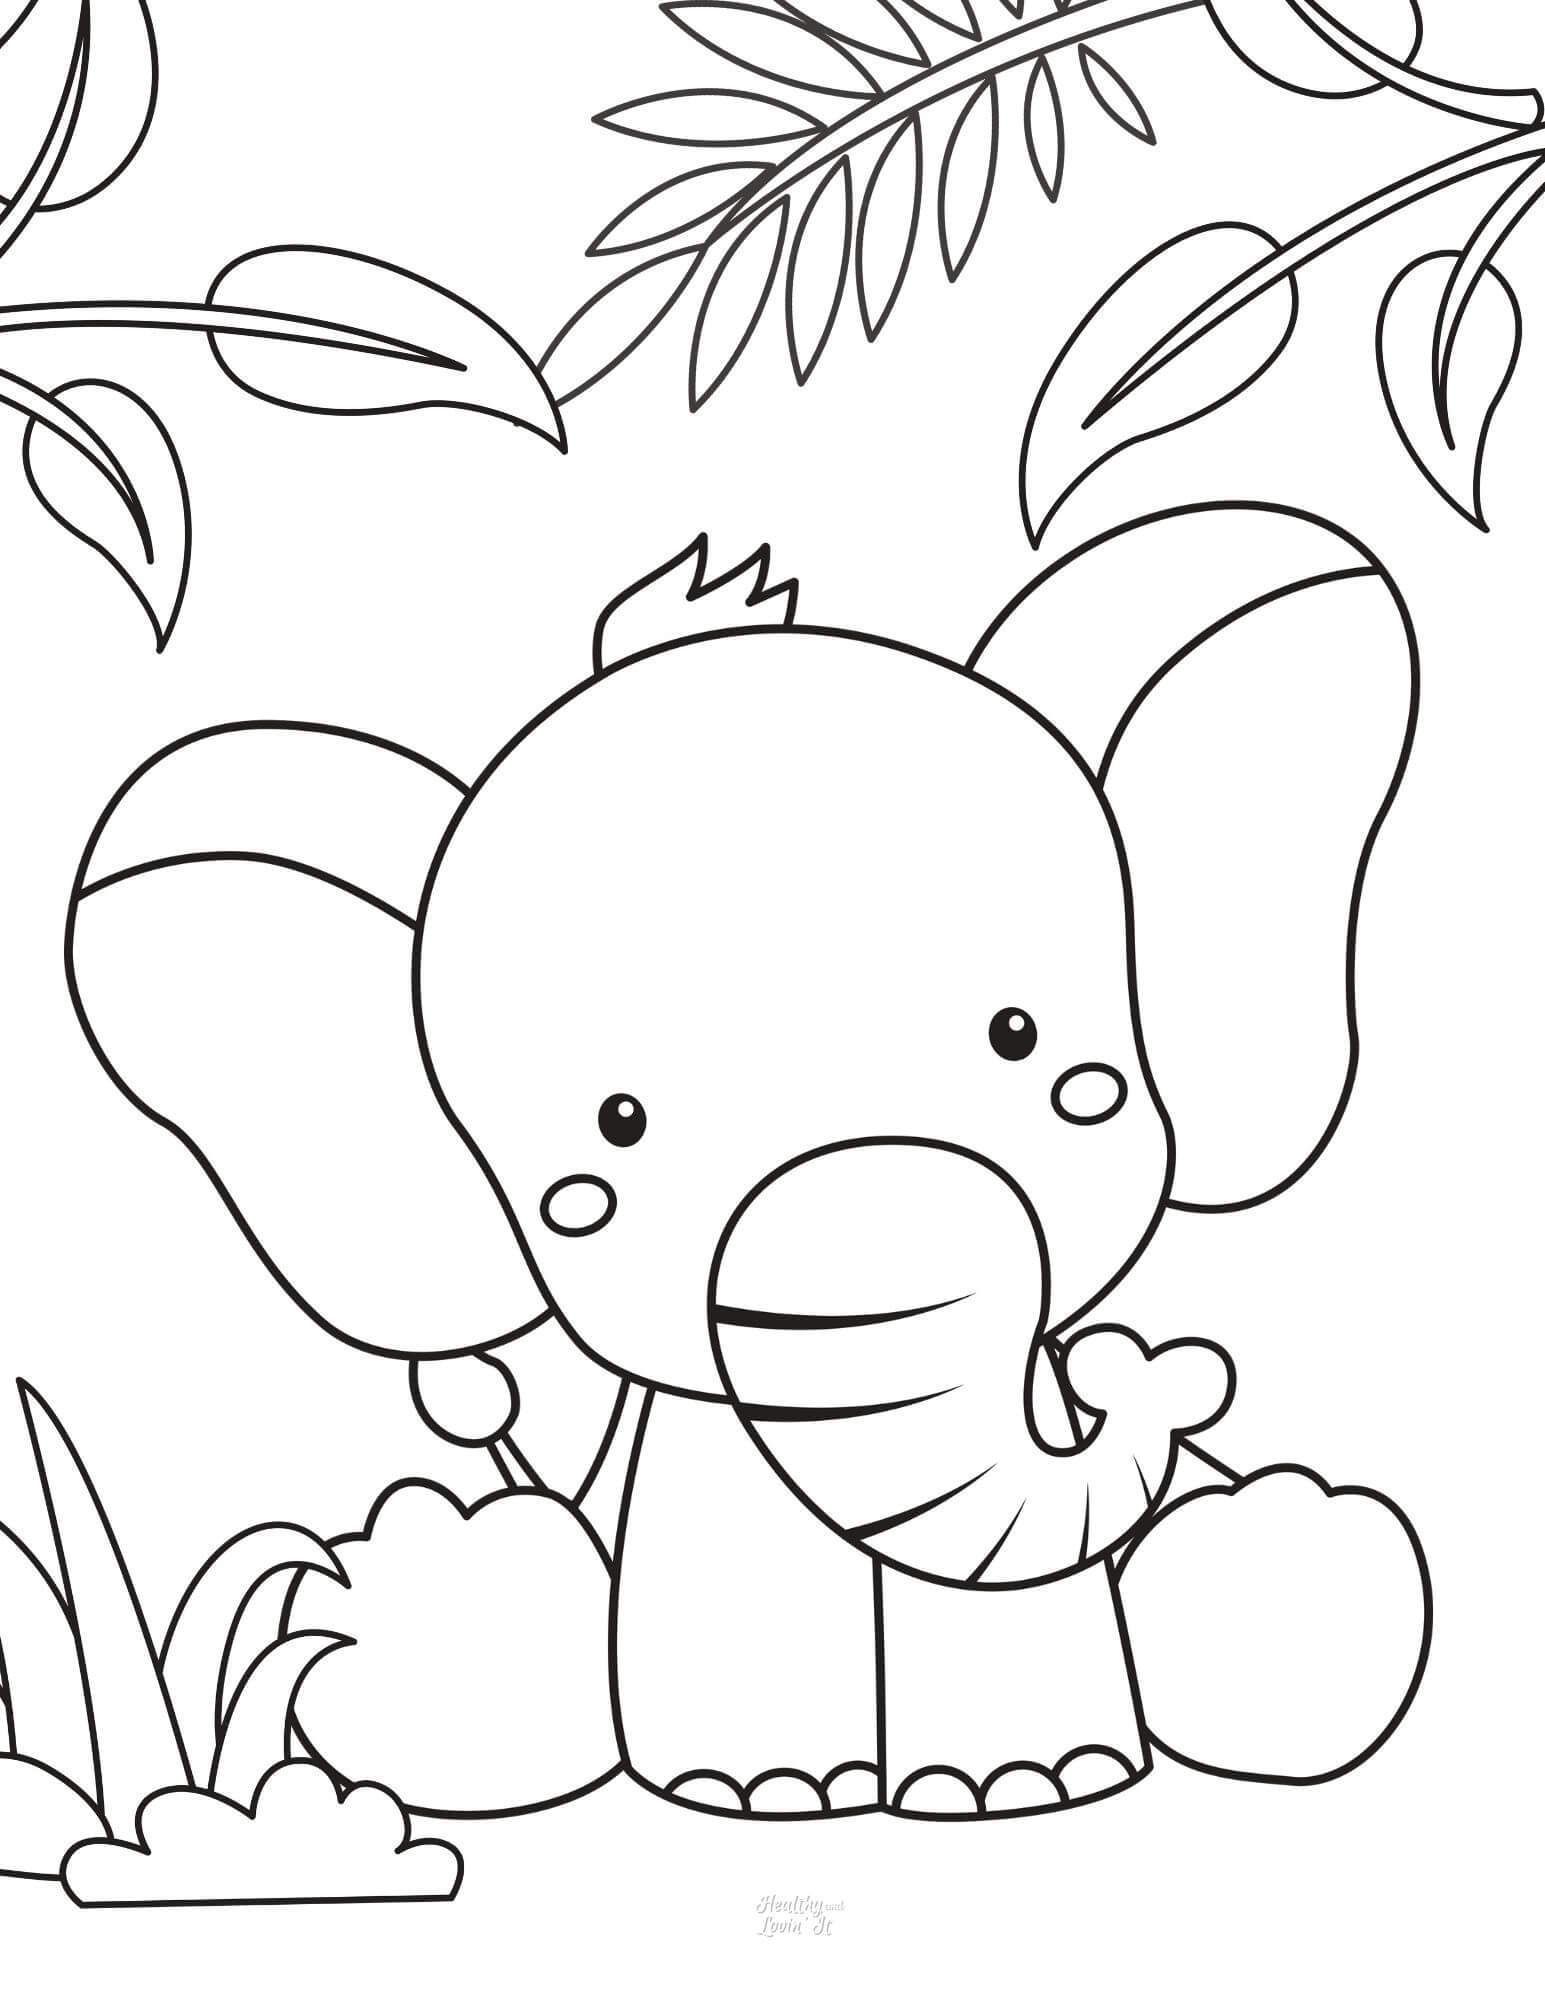 Free Printable Elephant Coloring Pages ,Easy Elephant , to Color